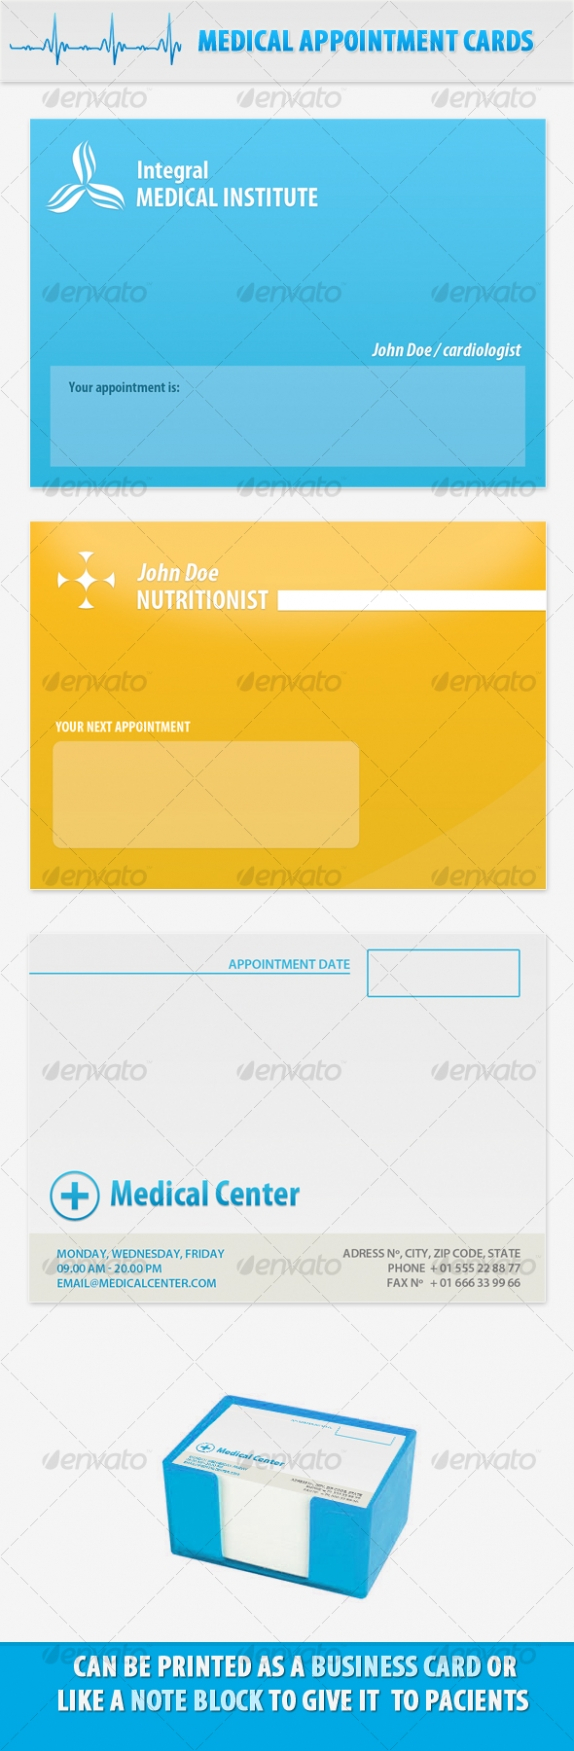 Cardview – Business Card & Visit Card Design Inspiration With Medical Appointment Card Template Free